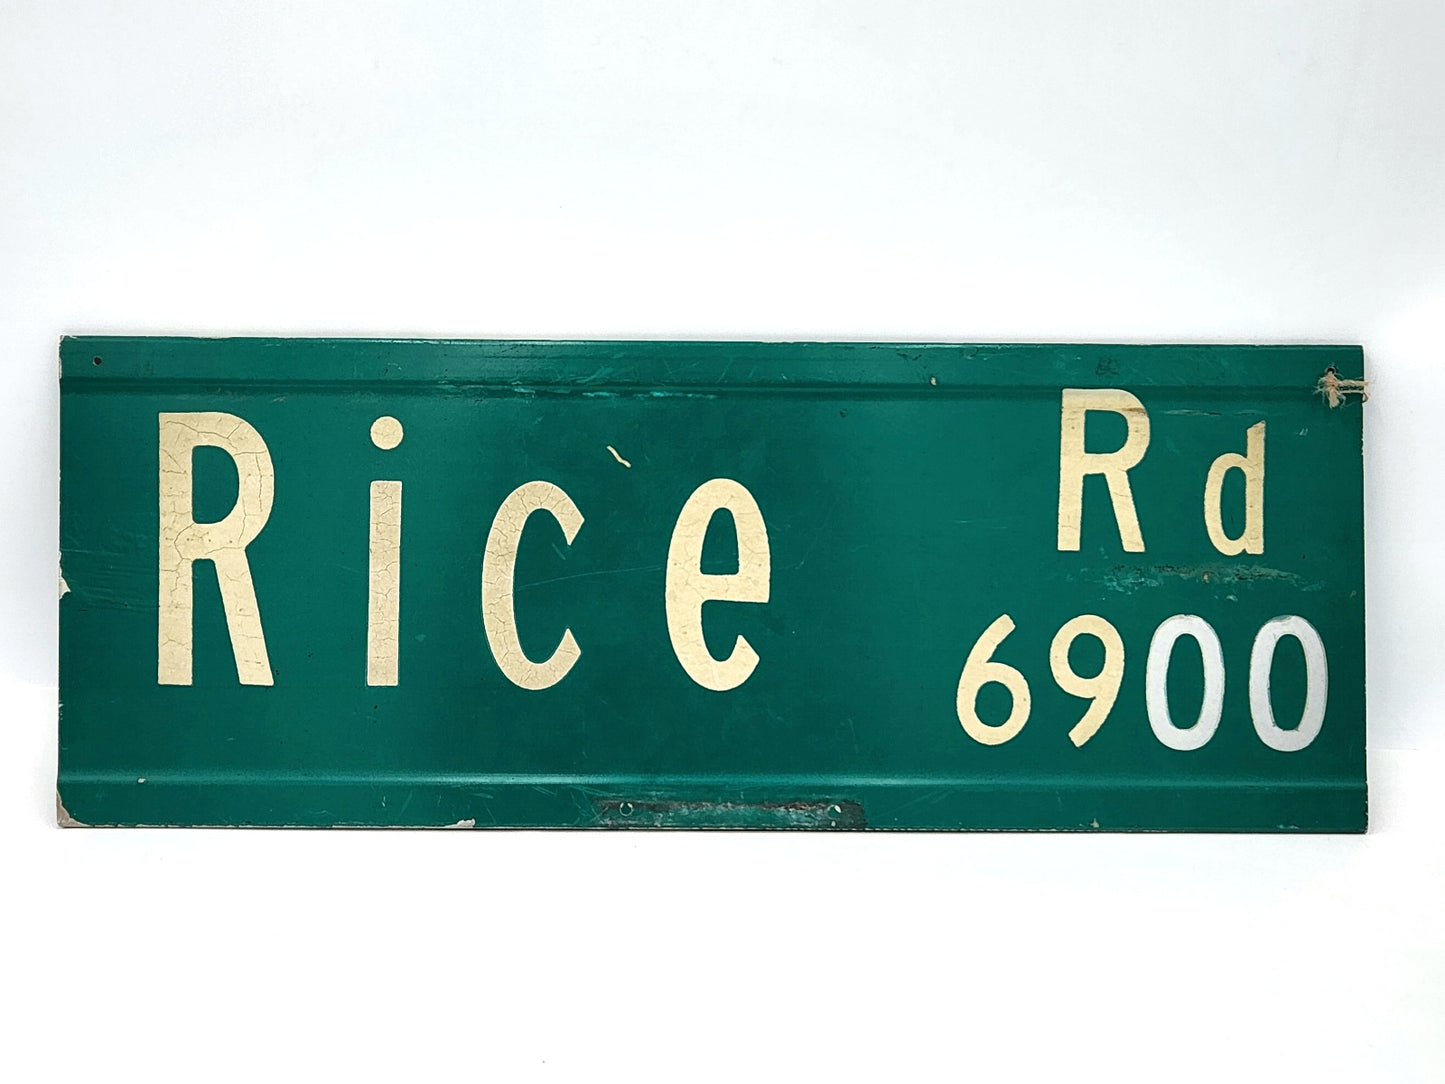 Rice Road sign found in Louisiana